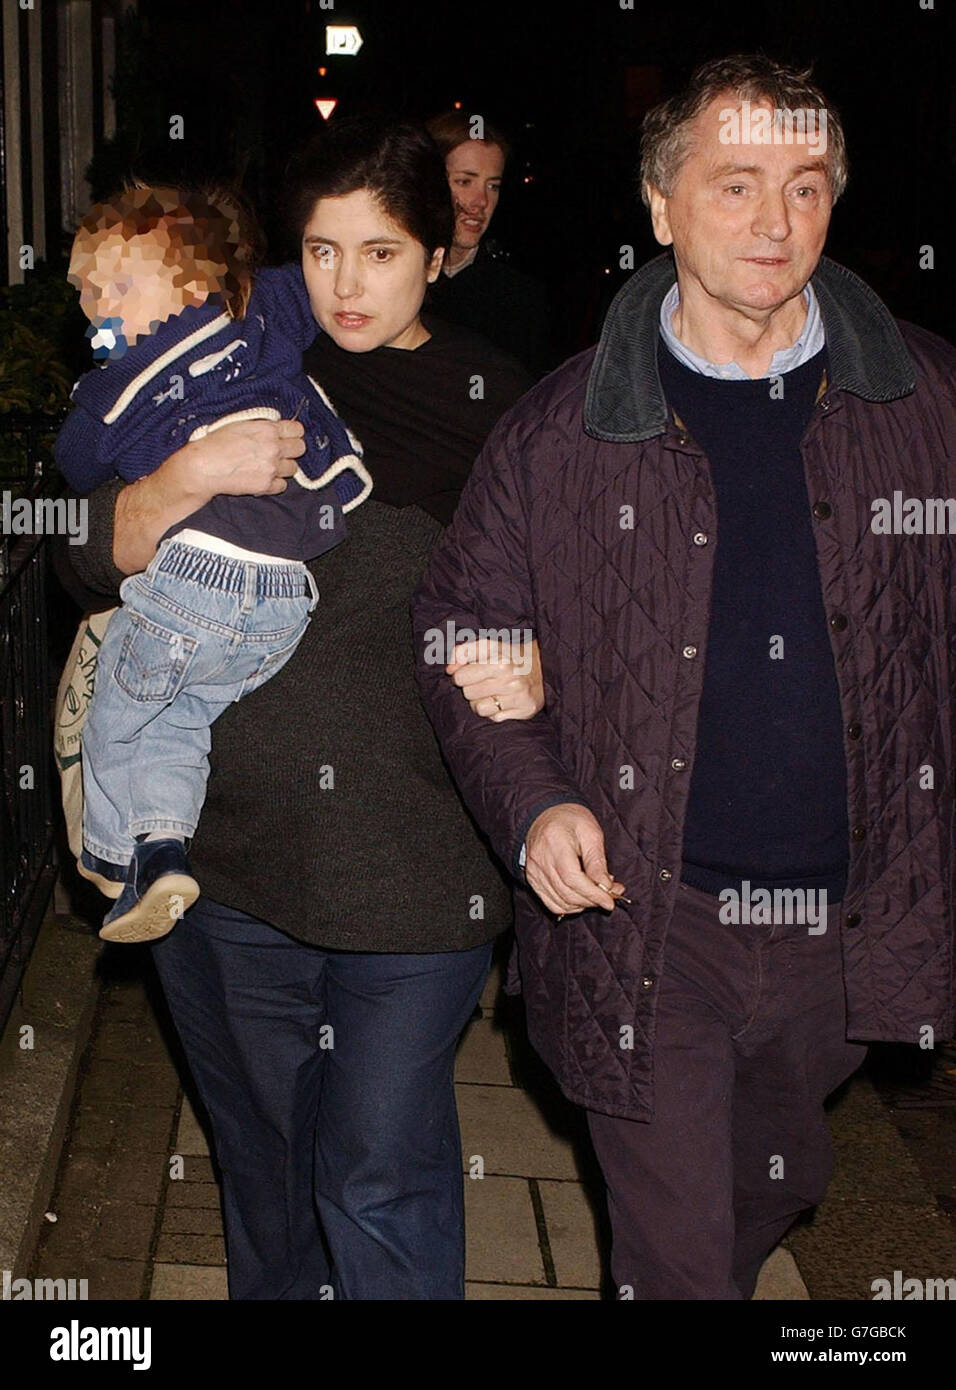 Kimberly Quinn, and husband Stephen return to their home. EDITORS PLEASE NOTE FACE OF THE CHILD HAS BEEN PIXELATED Stock Photo